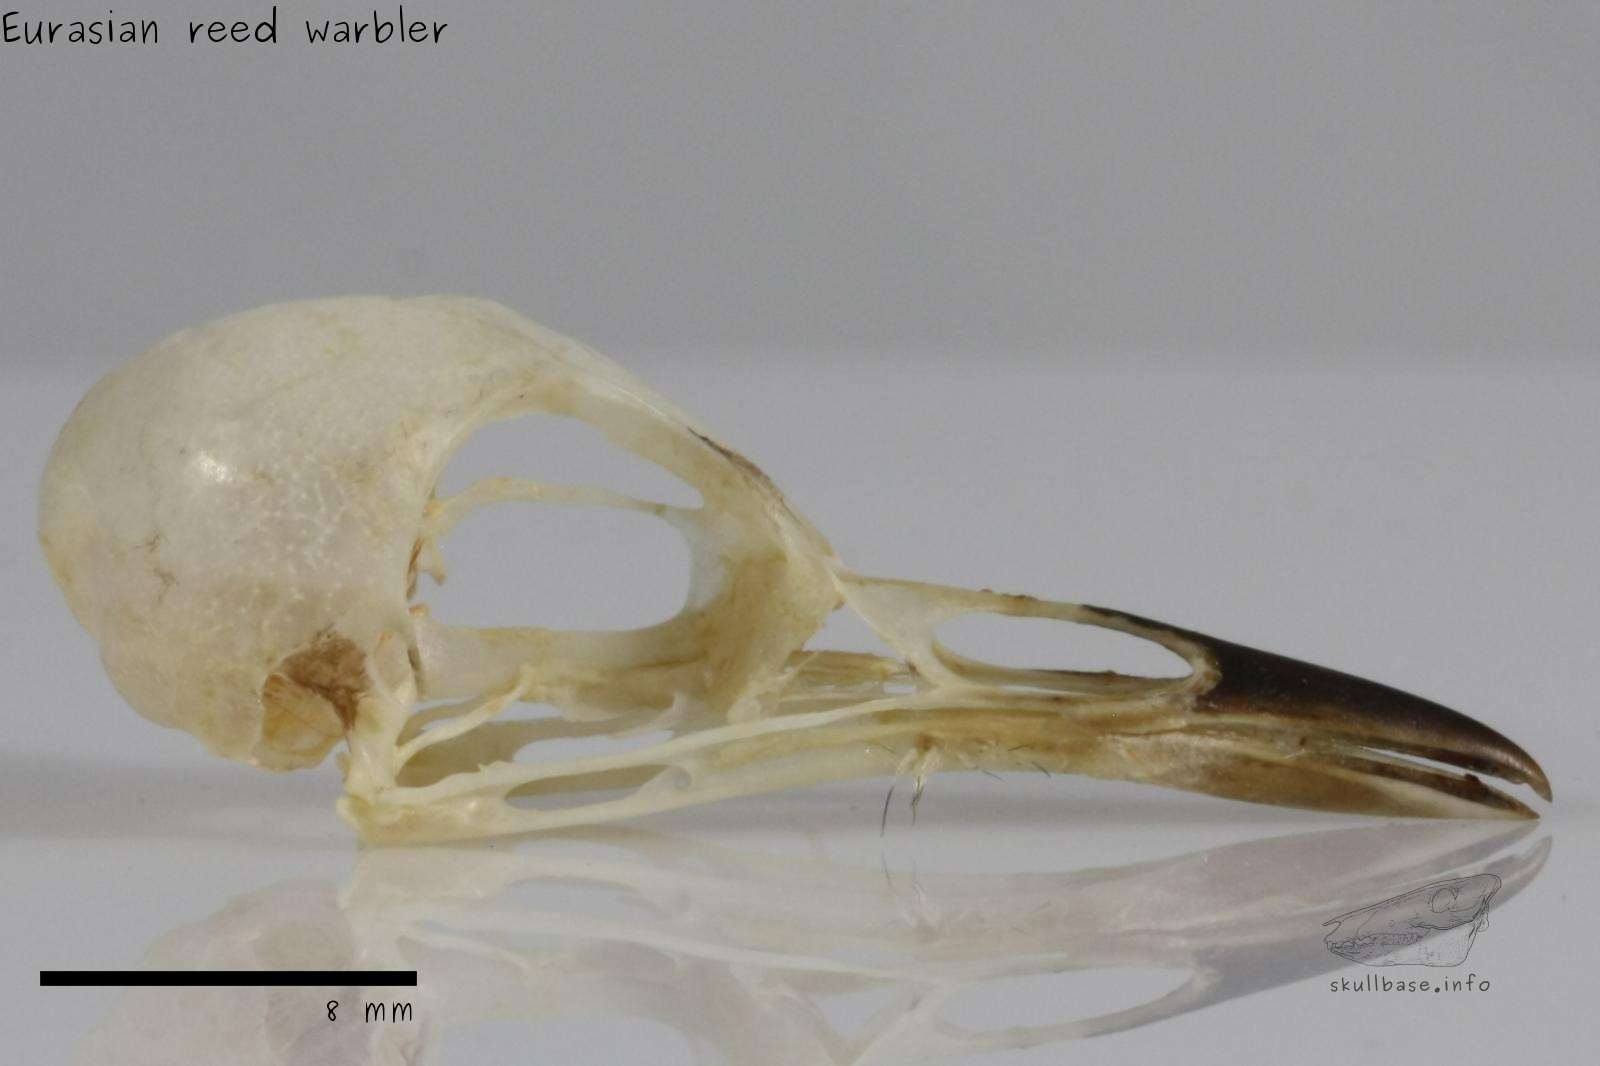 Eurasian reed warbler (Acrocephalus scirpaceus) skull lateral view